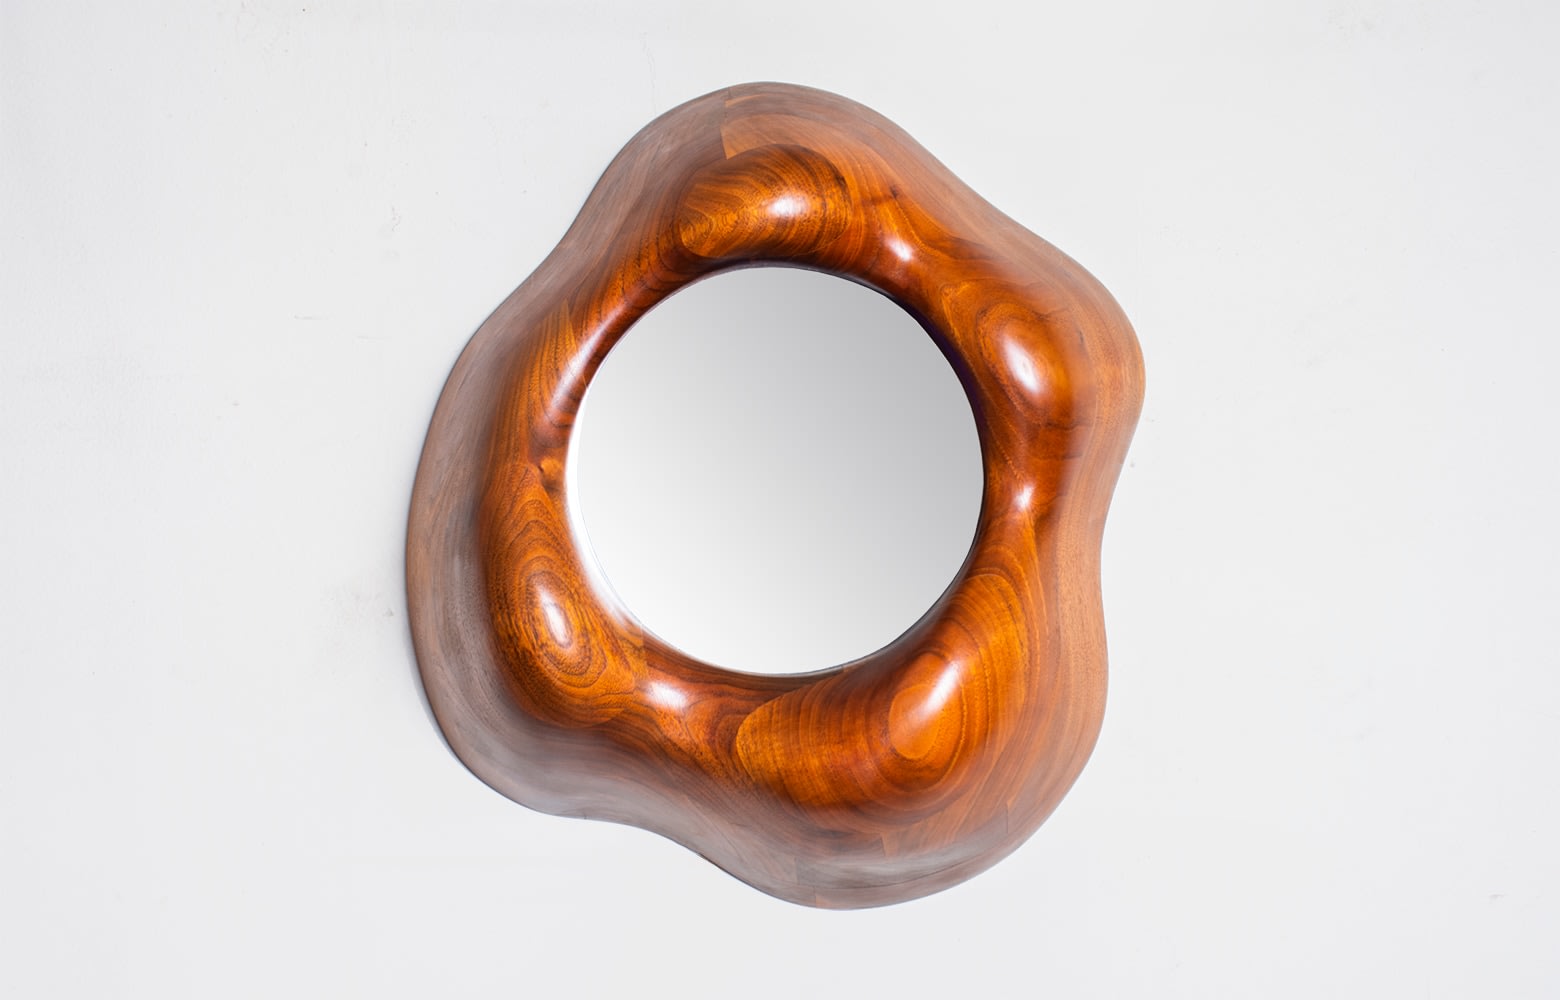 a stacked and laminated carved wooden mirror of rounded biomorphic form, in the style of his 1960s-70s works, by american master craftsman wendell castle, with an inset circular mirror, intended to hang from a wall.